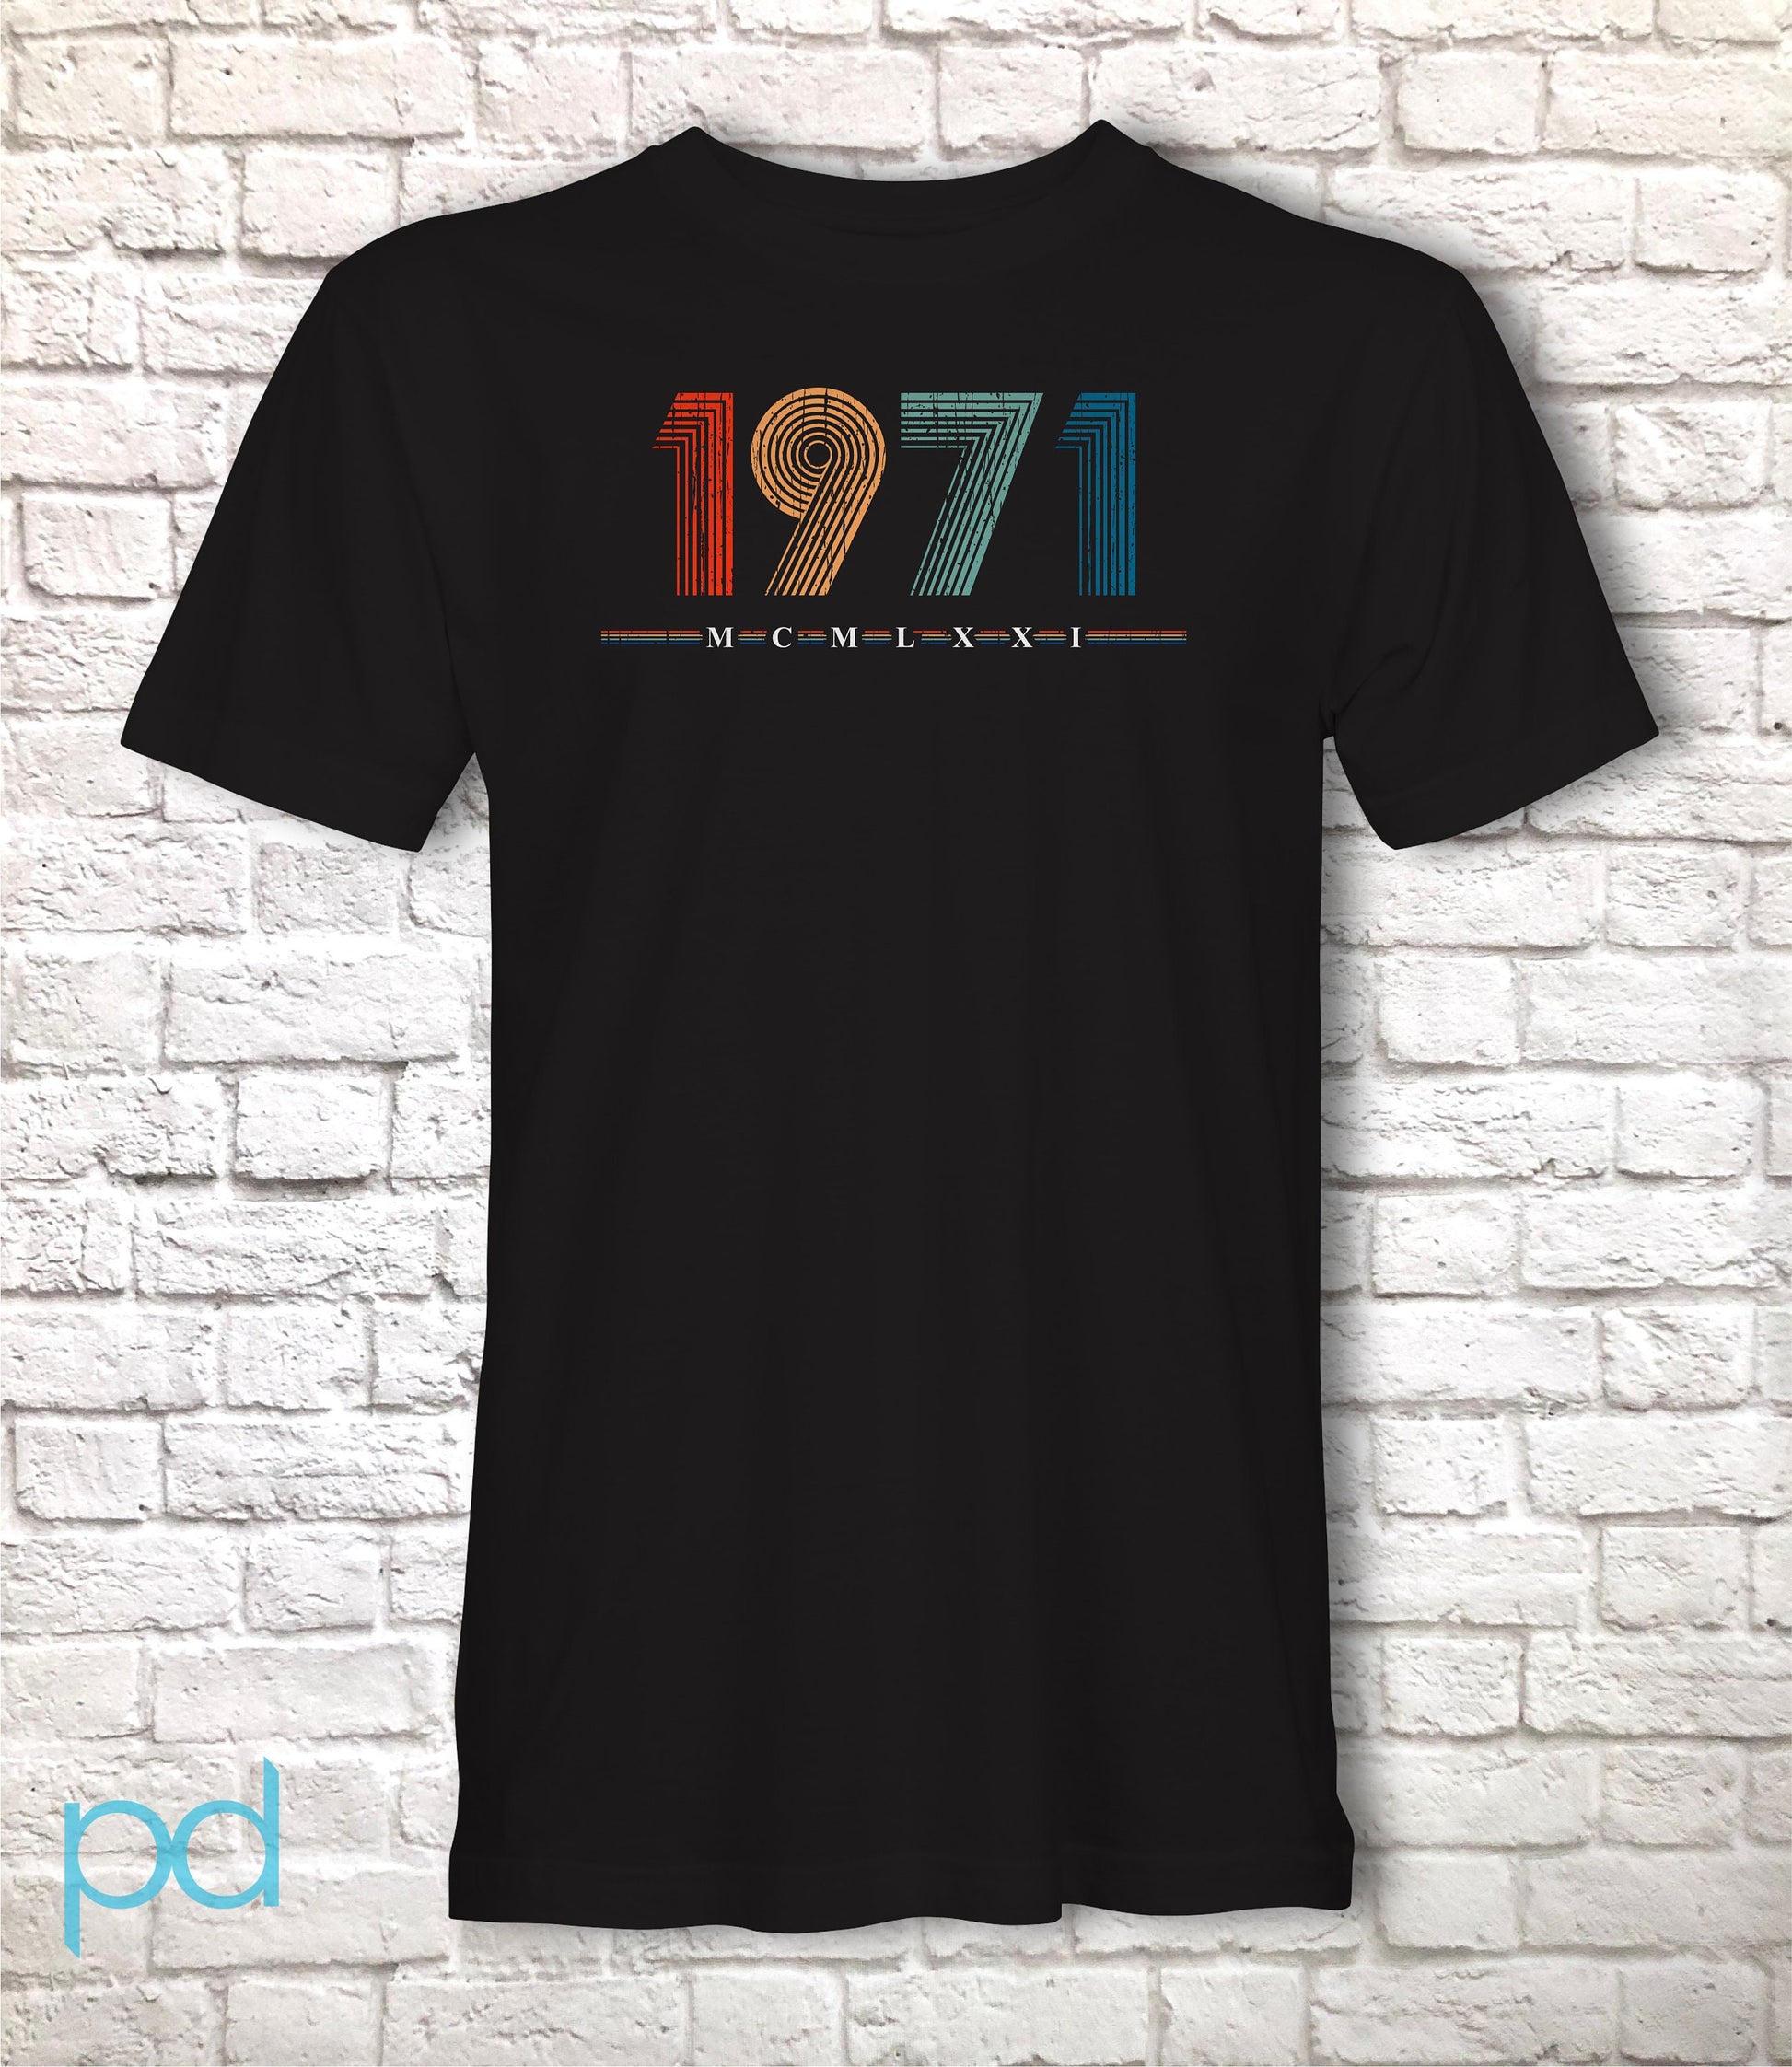 1971 T Shirt, 51st Birthday Gift T-Shirt in Retro & Vintage 70s style, MCMLXXI Fiftieth Bday Tee Shirt Top For Men or Women